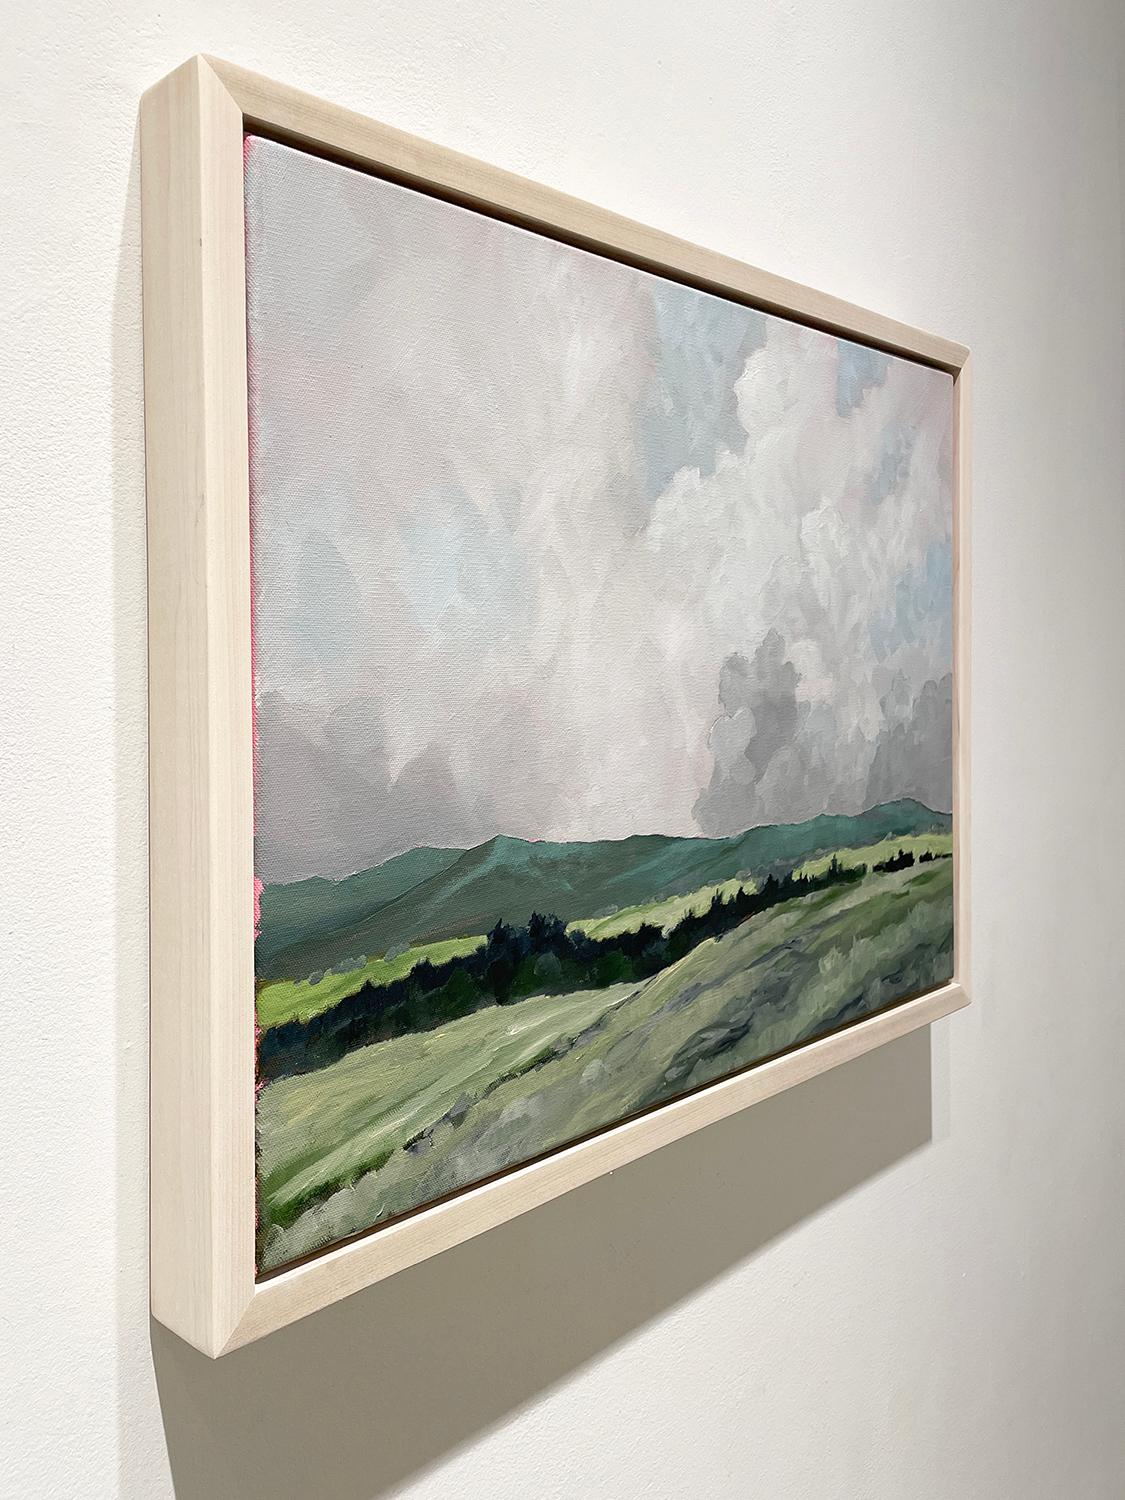 Modern en plein air landscape oil painting on canvas of countryside mountains and grey sky
'Clearing Storm' by Joseph Rapp
18 x 24 inches, oil on canvas
19.75 x 24 x 2 inches framed in white stained wood floater frame

Joseph Rapp’s craftsmanship is